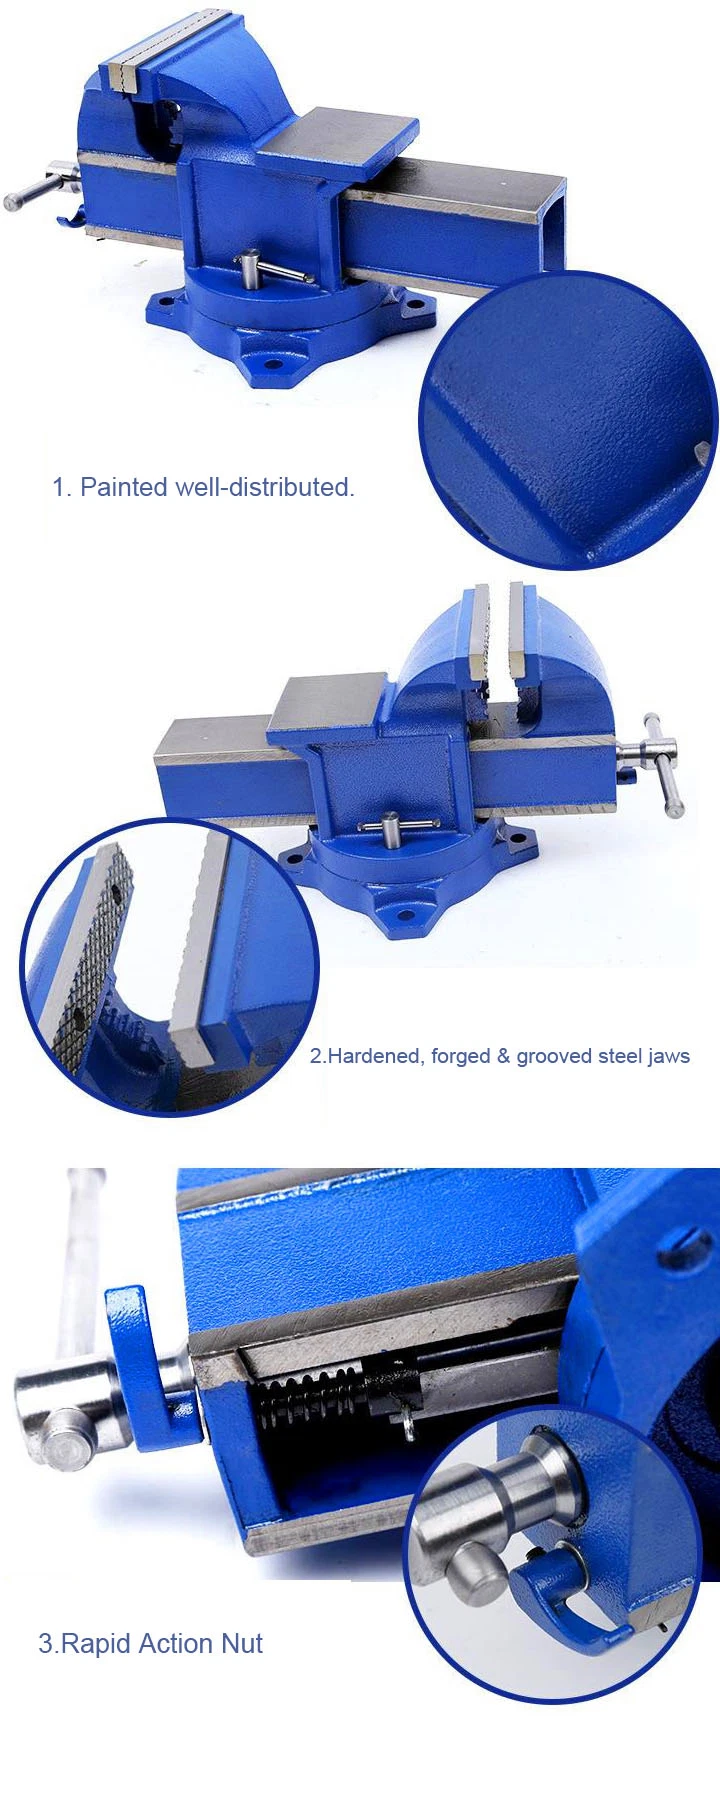 5′′/125mm Quick-Release Bench Vise Swivel Base with Anvil